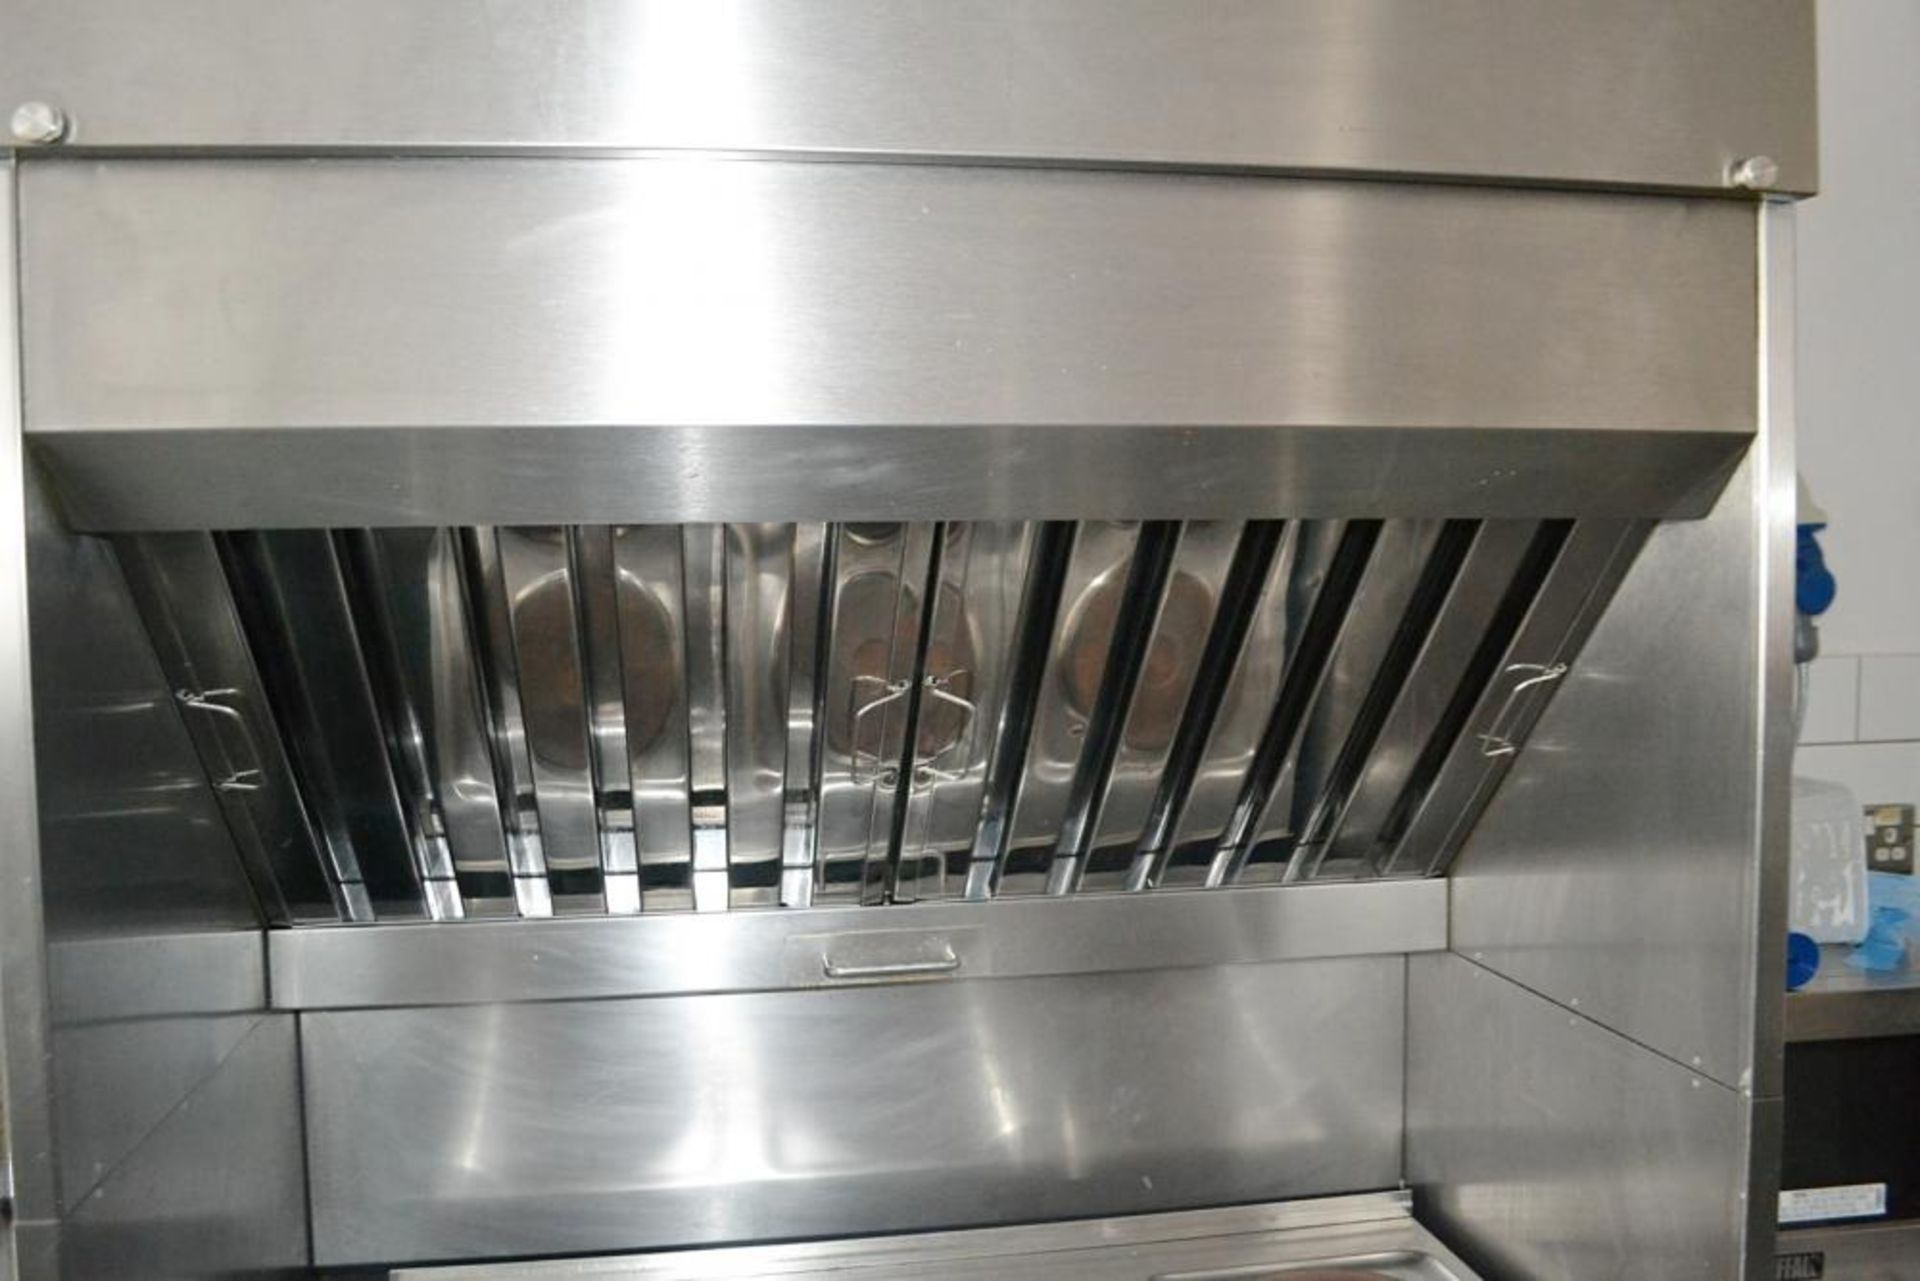 1 x Lincat Silverlink 6 Plate Commercial Electric Burner and Extraction Unit - CL425 - Location: Alt - Image 14 of 16